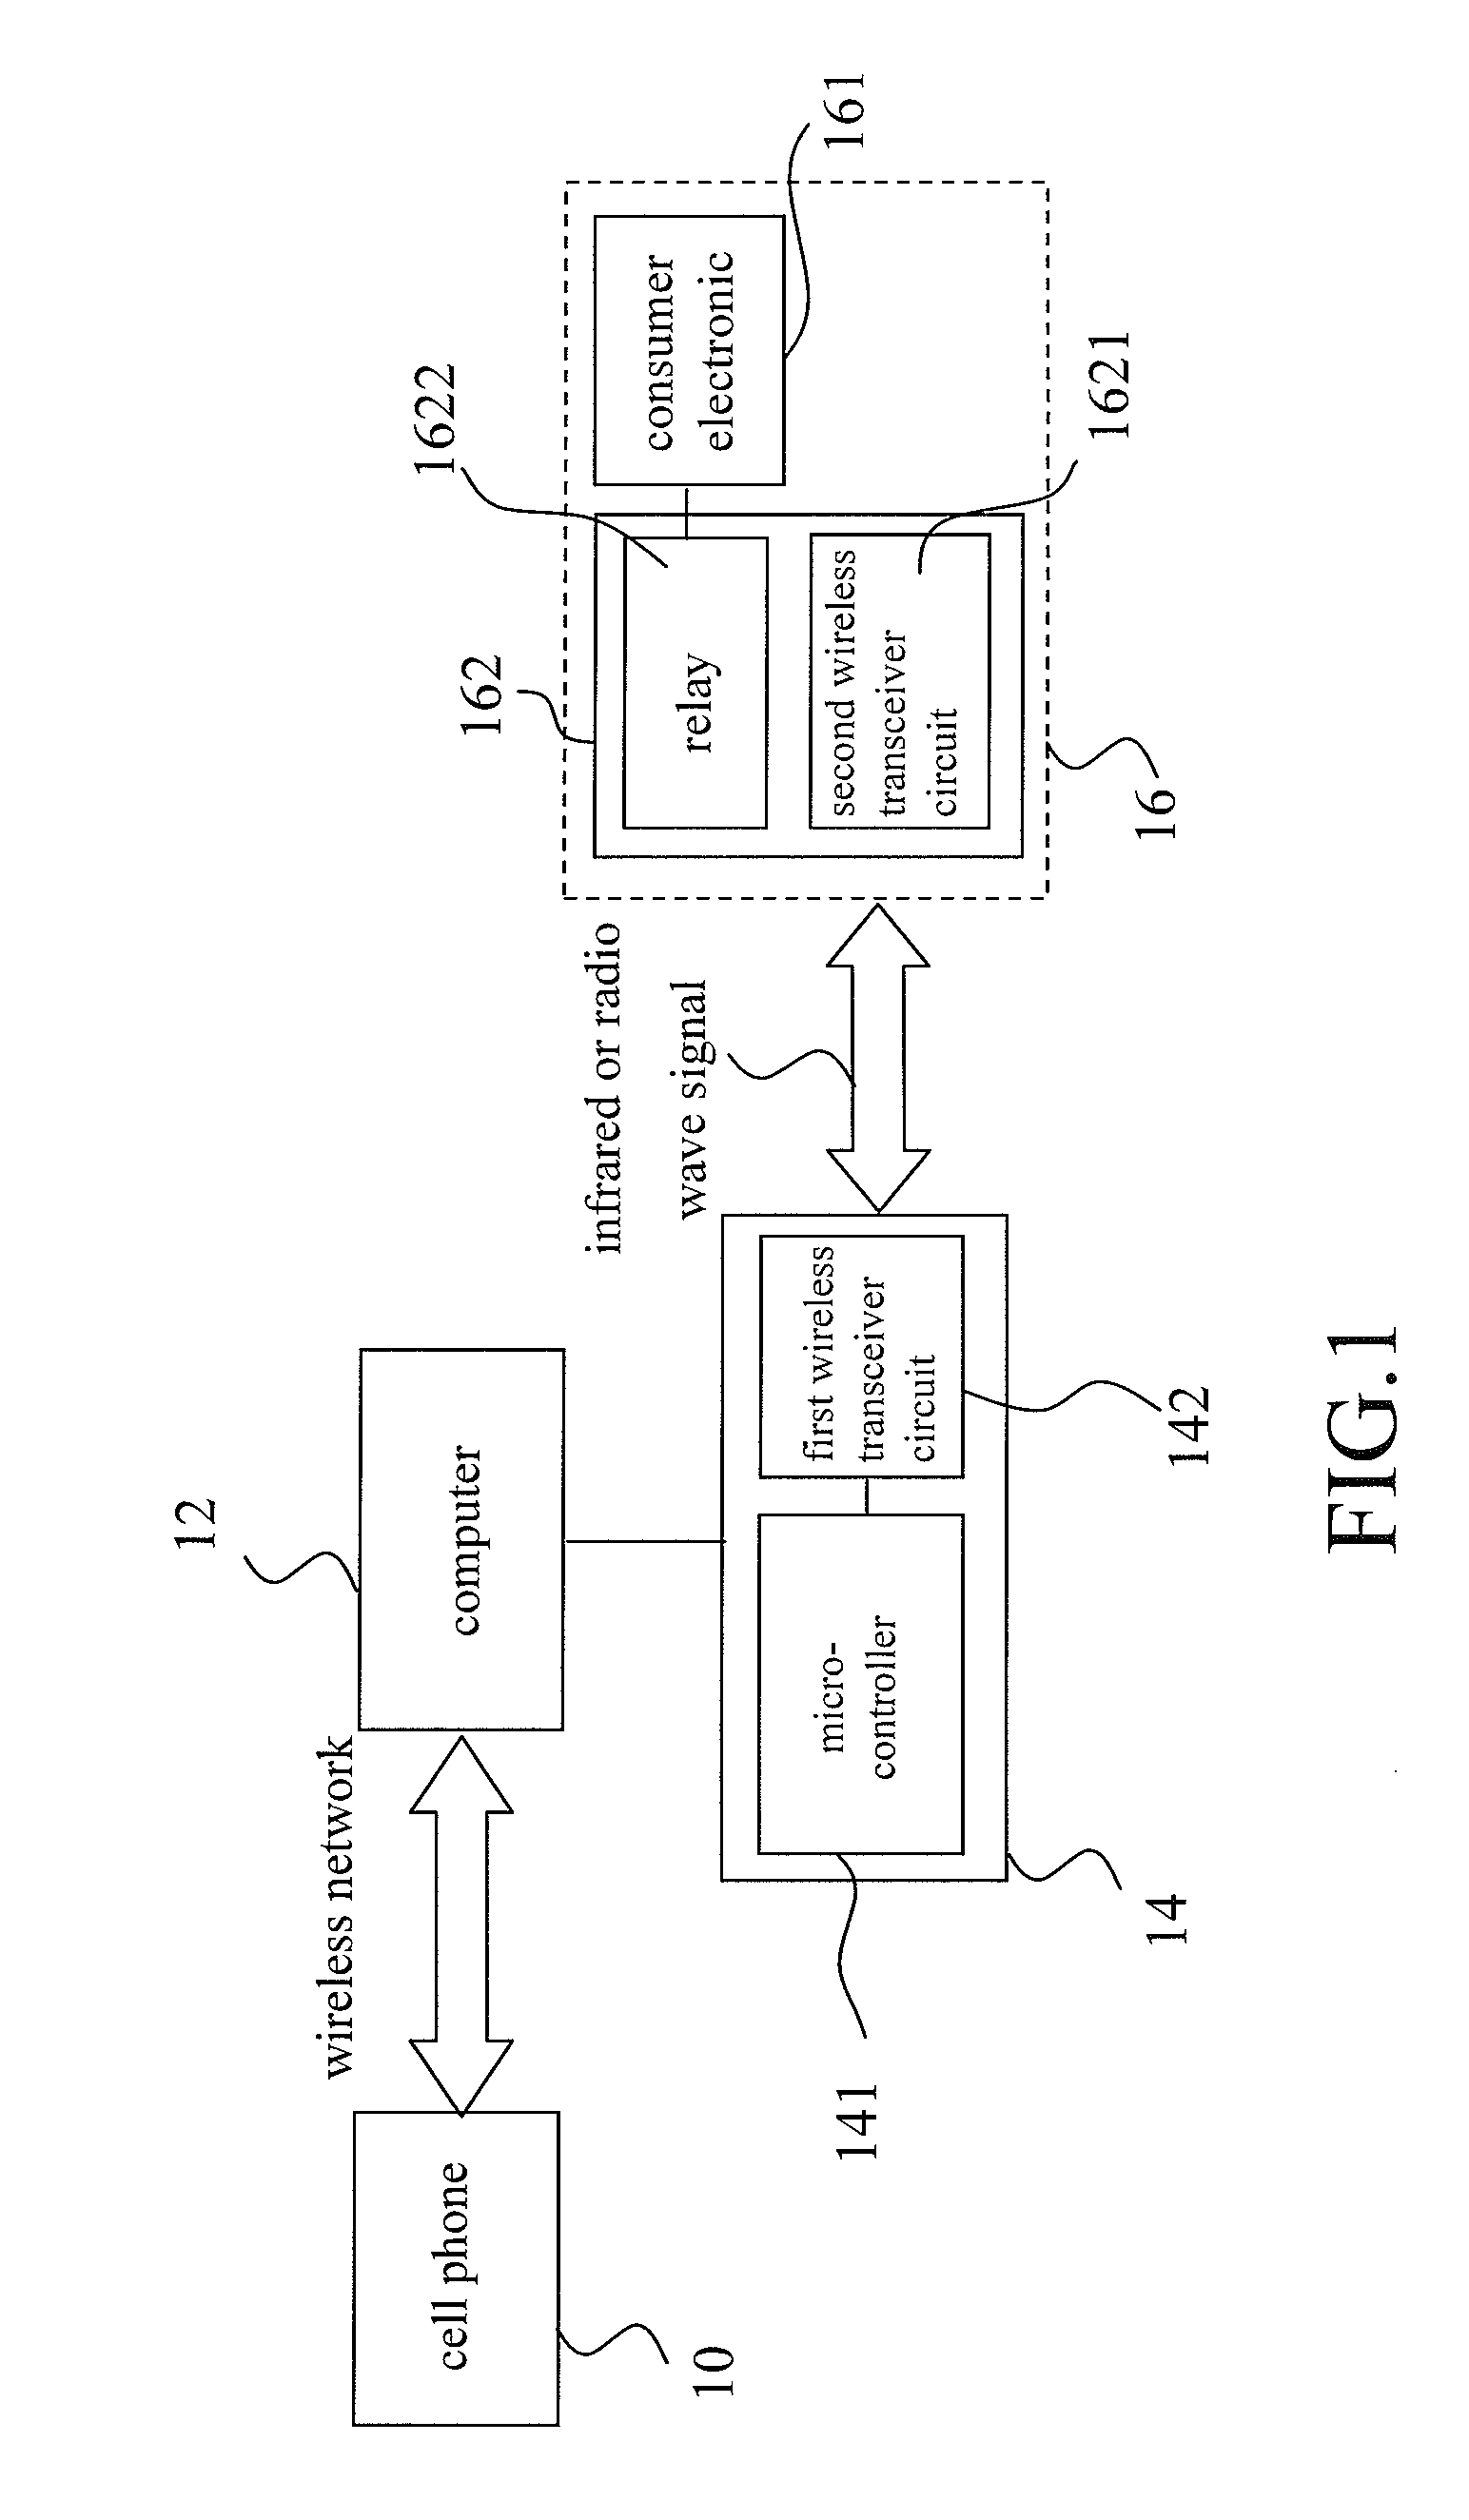 Integrated System for Remote Monitoring Home Appliances by Cell Phone